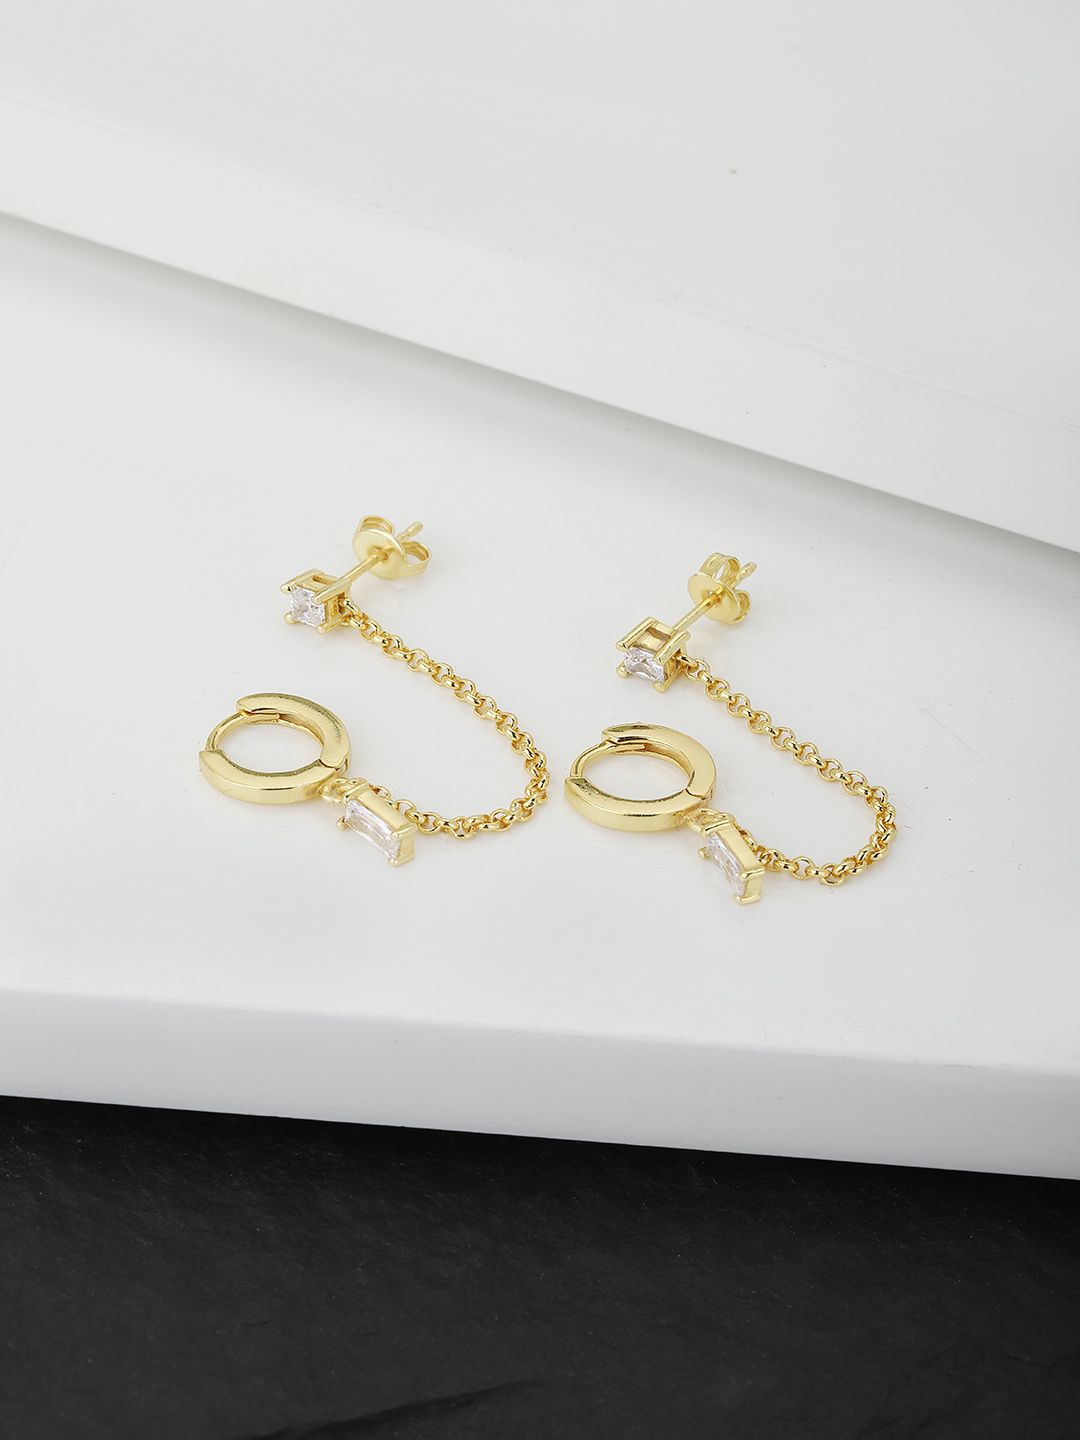 Carlton London Gold-Plated Contemporary Studs Earrings Price in India